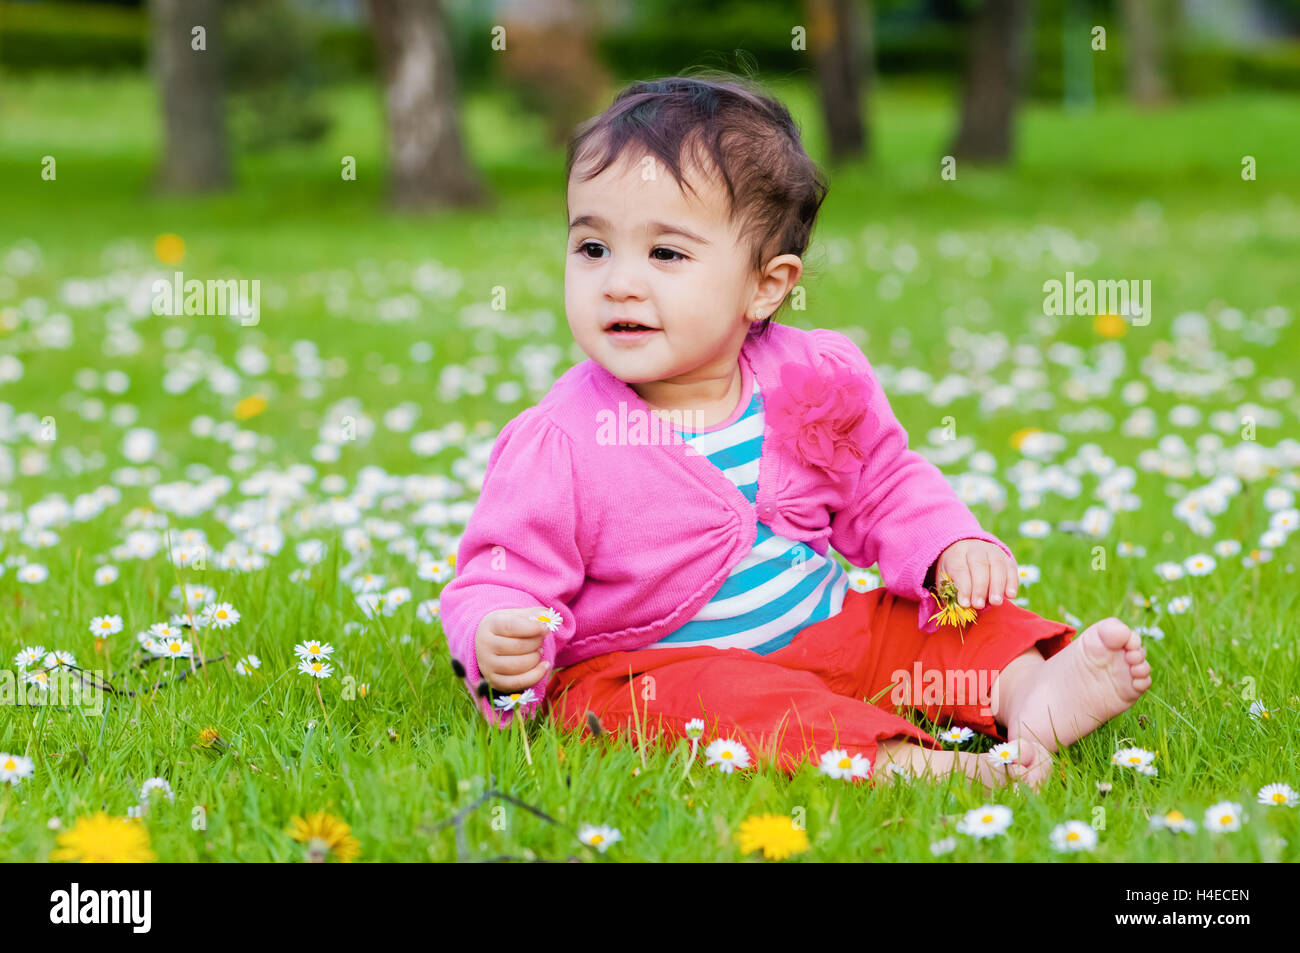 Cute chubby toddler sitting on the grass smiling exploring nature outdoors in the park Stock Photo